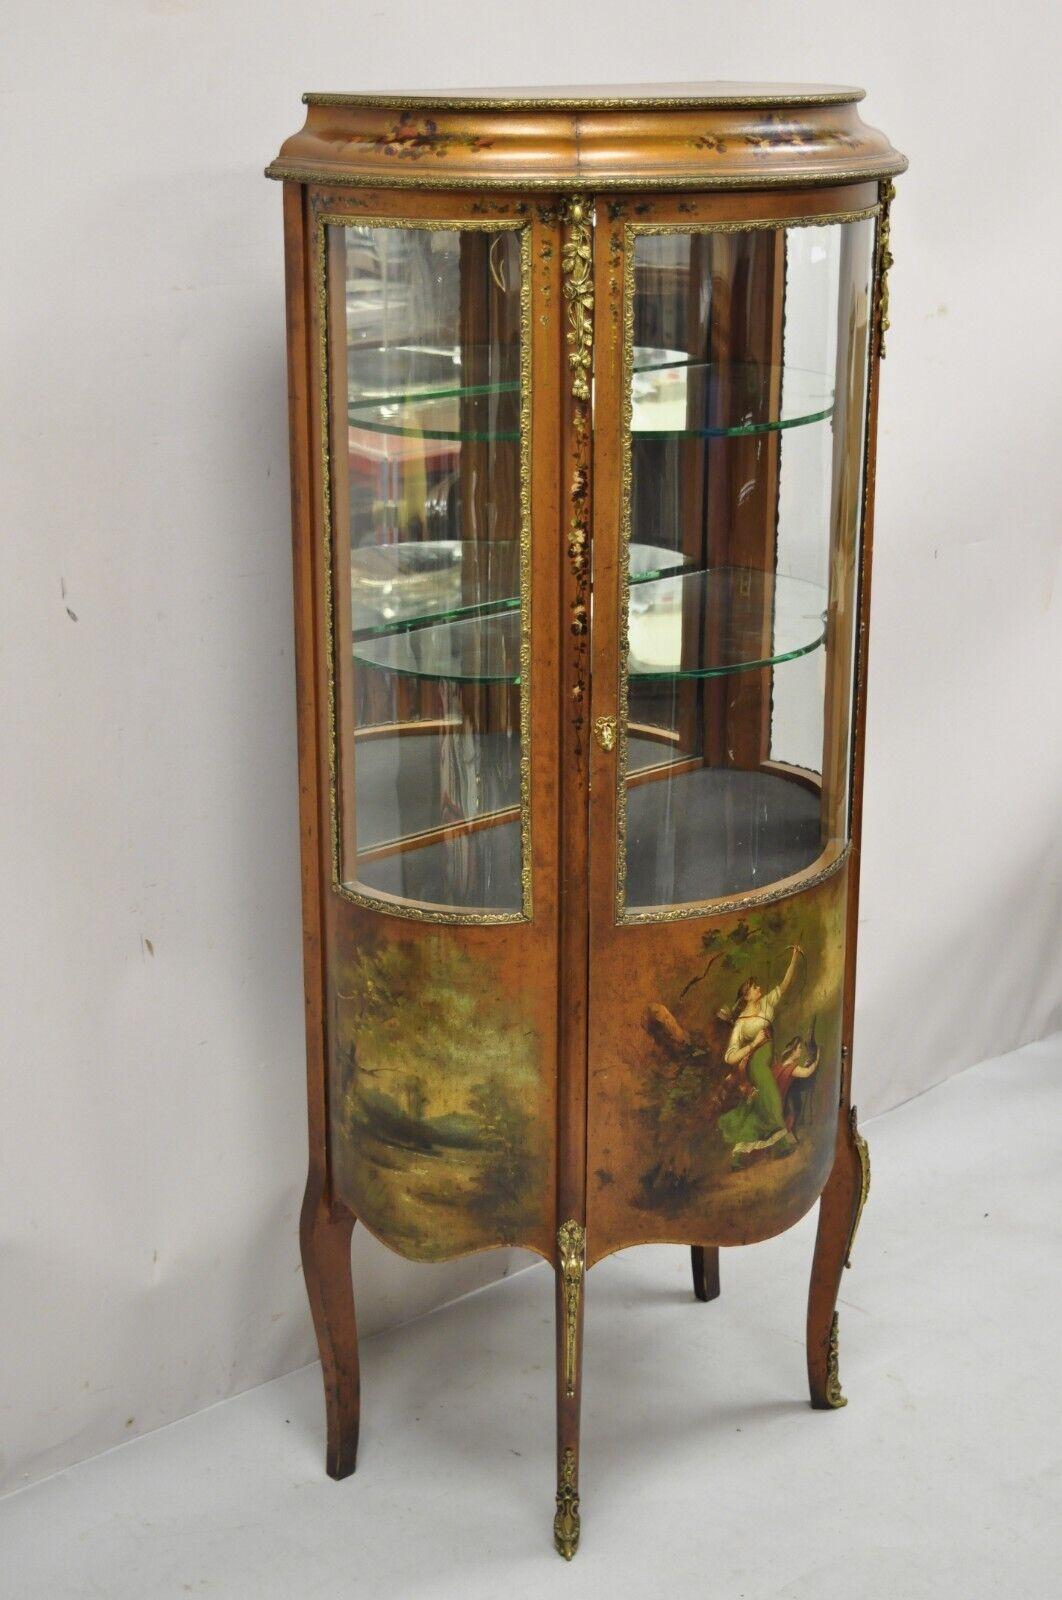 Antique French Louis XV style small bowed glass painted curio display cabinet. Item features (3) bowed glass panels, hand painted scene to front and sides, lighted interior, working lock and key, 2 glass shelves, very nice antique item, great style